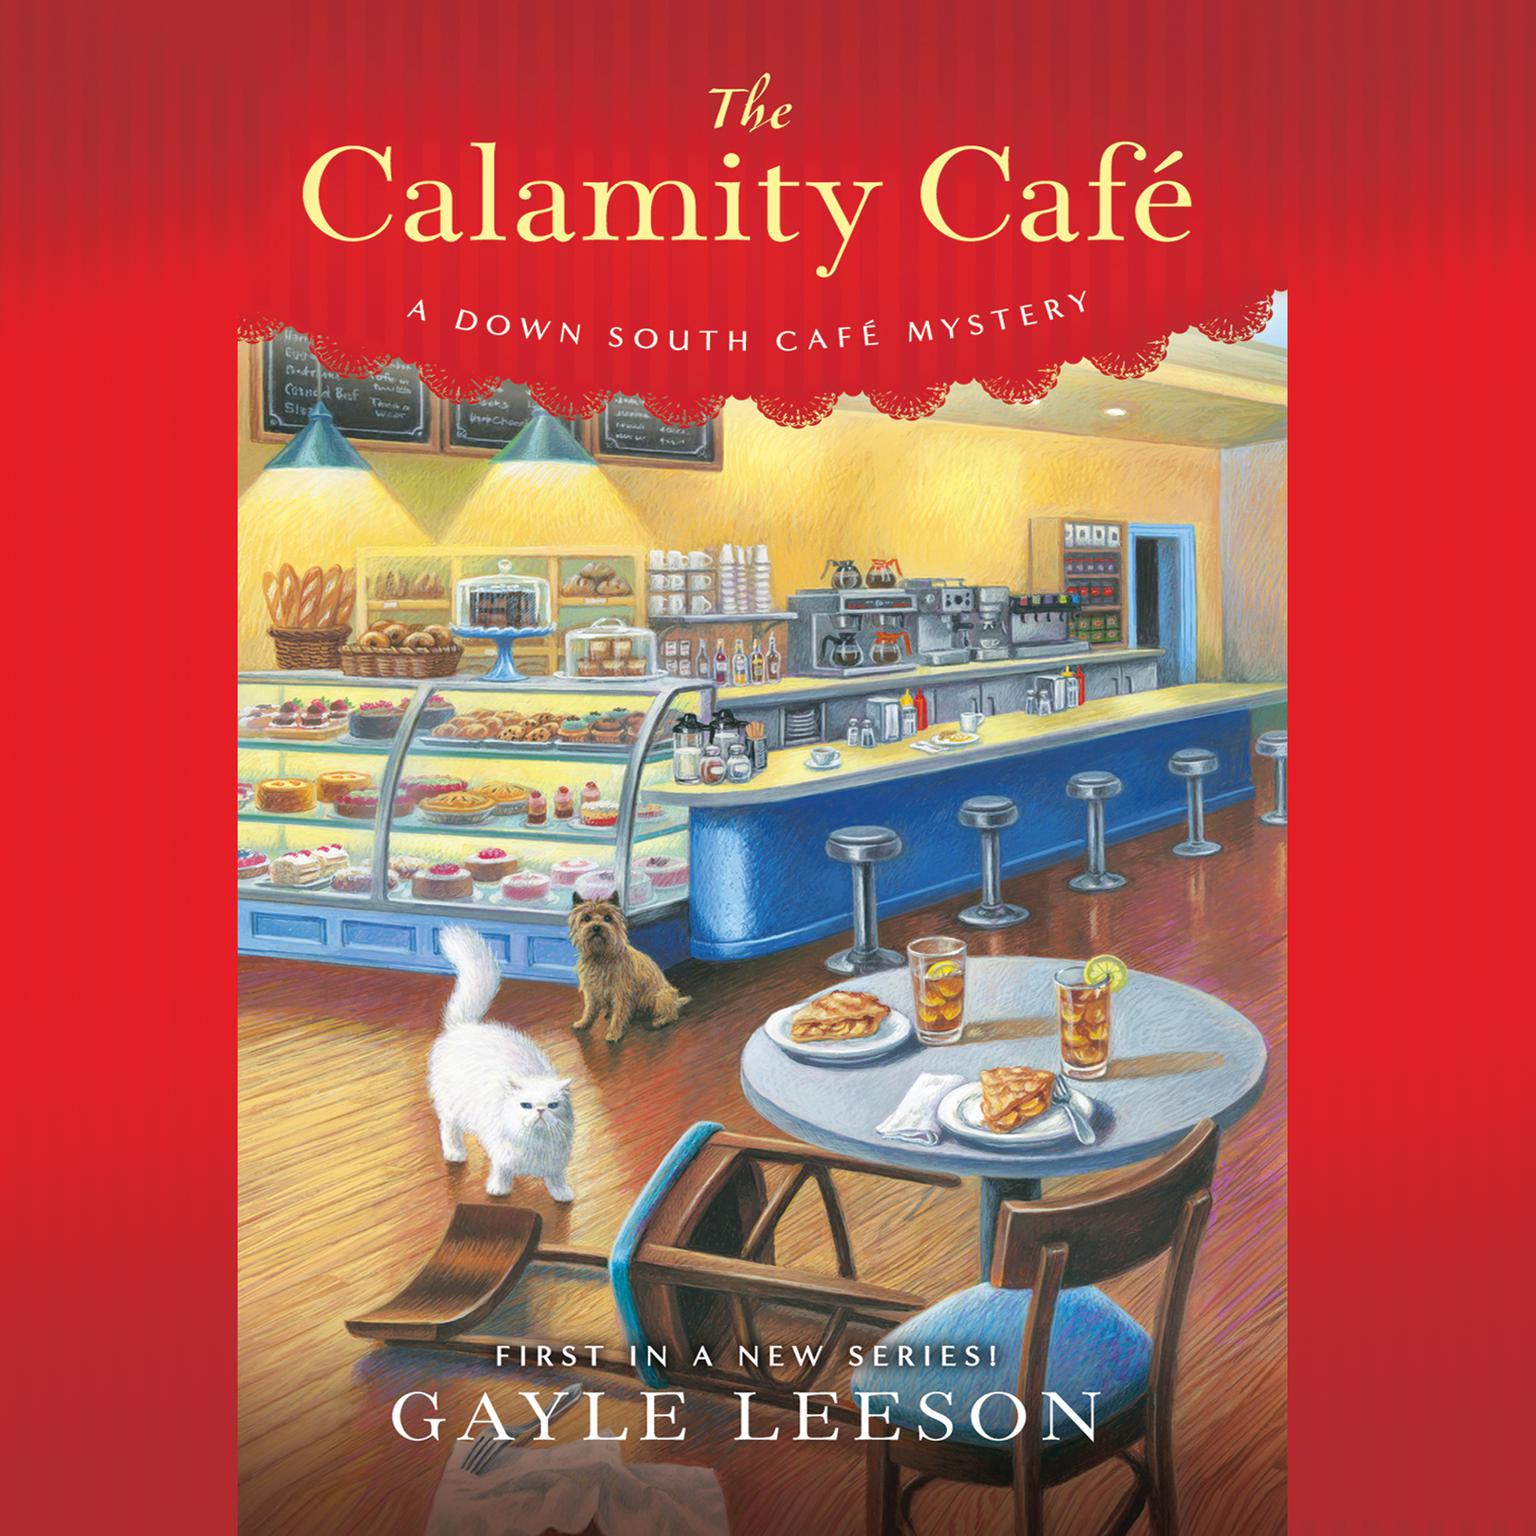 Calamity Cafe, The: A Down South Cafe Mystery Audiobook, by Gayle Leeson